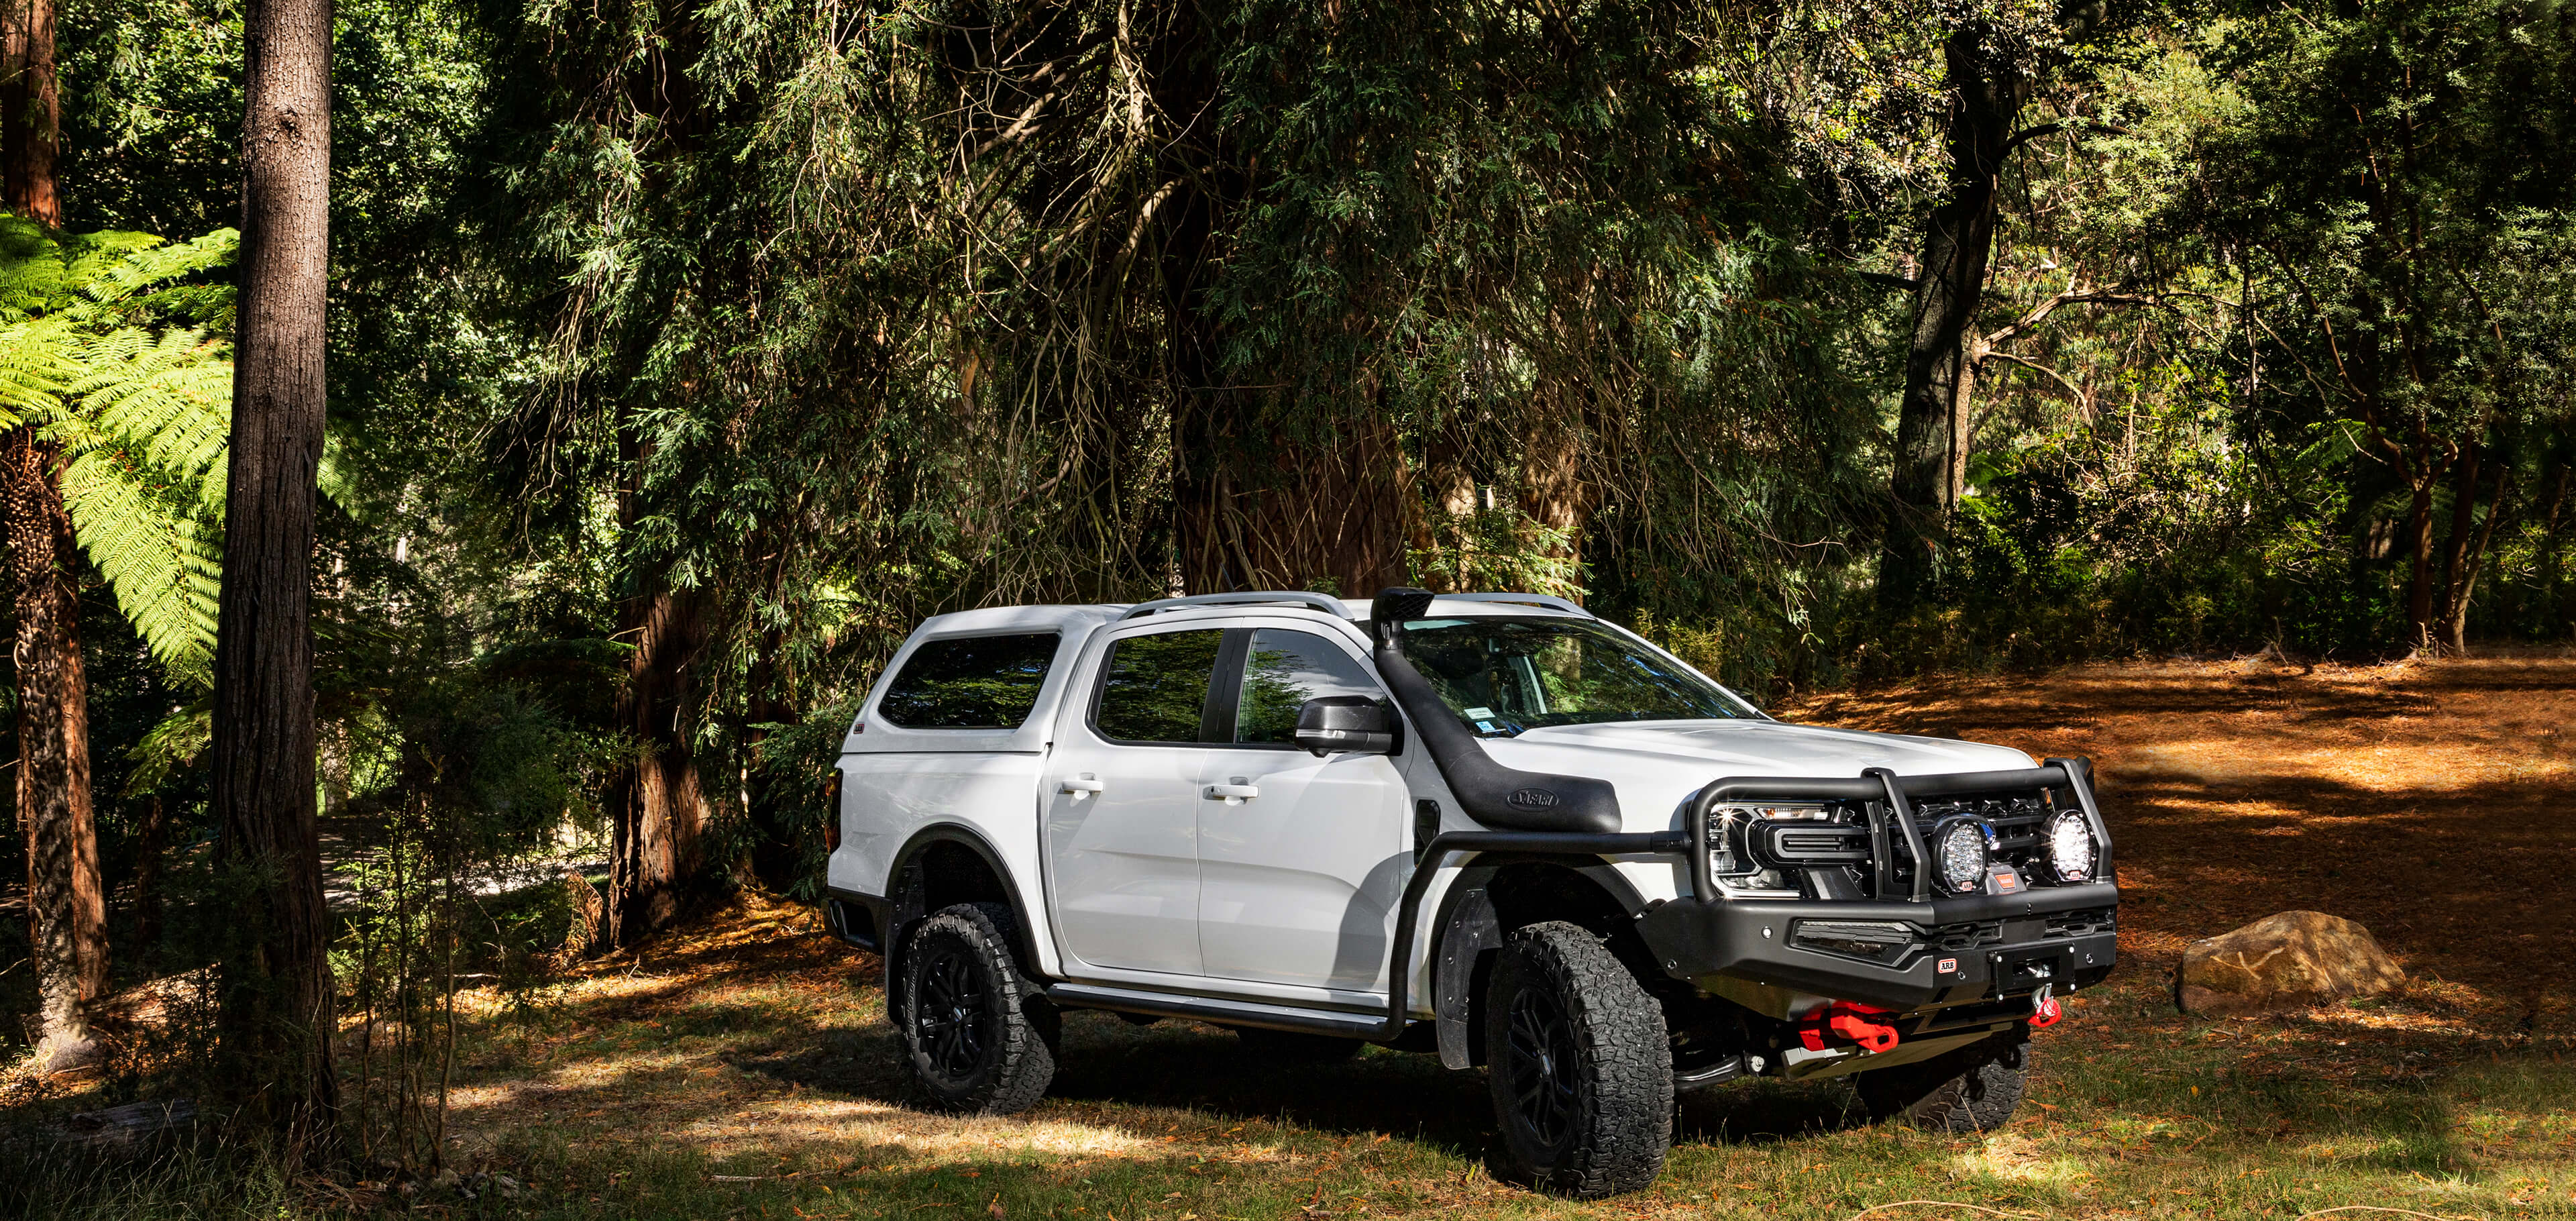 8 Accessories to Buy to Upgrade Your 4x4